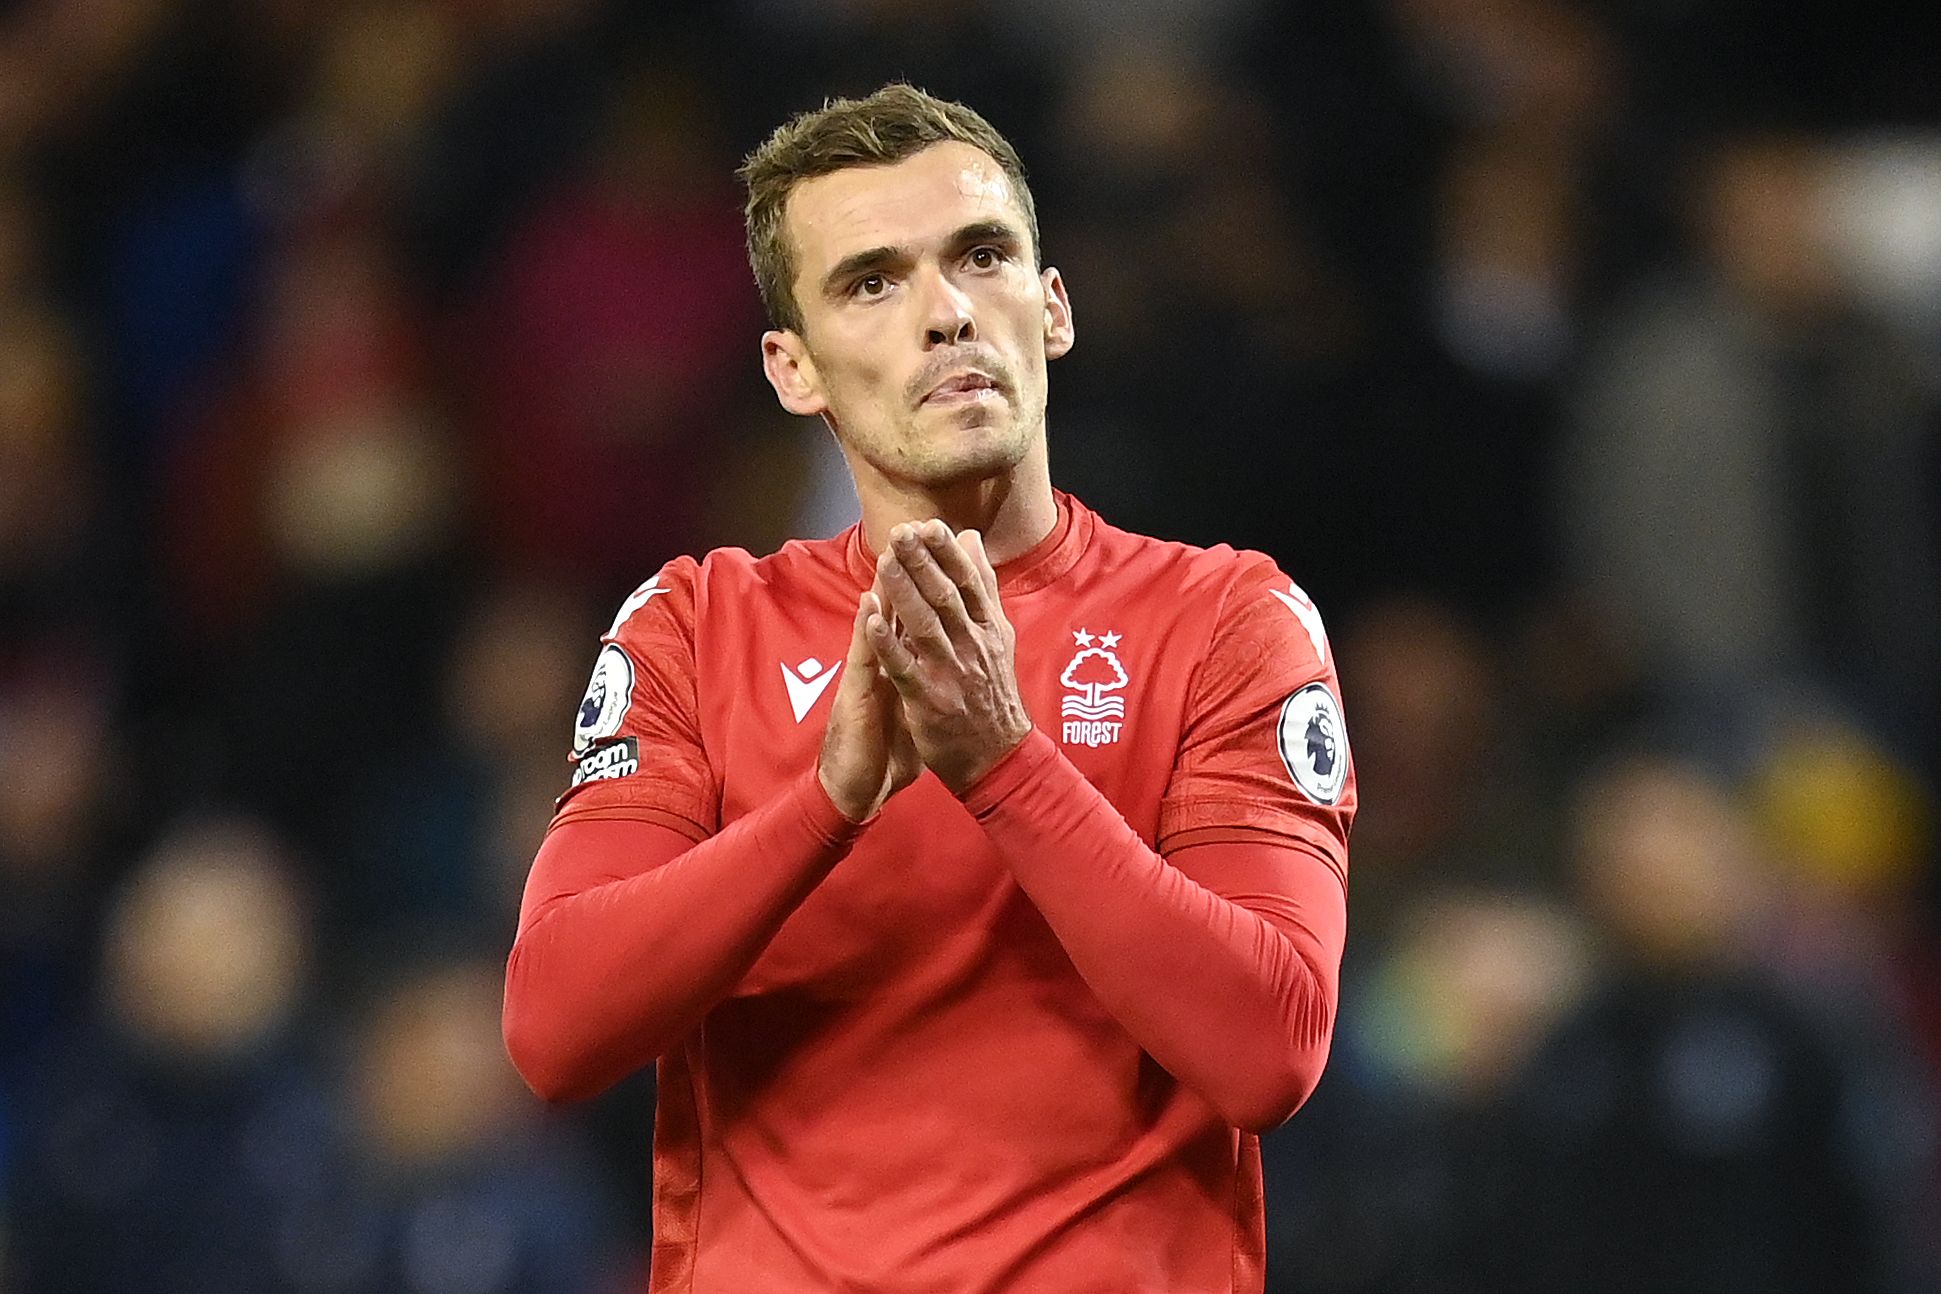 Harry Toffolo spotted at Anderlecht ahead of move - Get Belgian & Dutch Football News